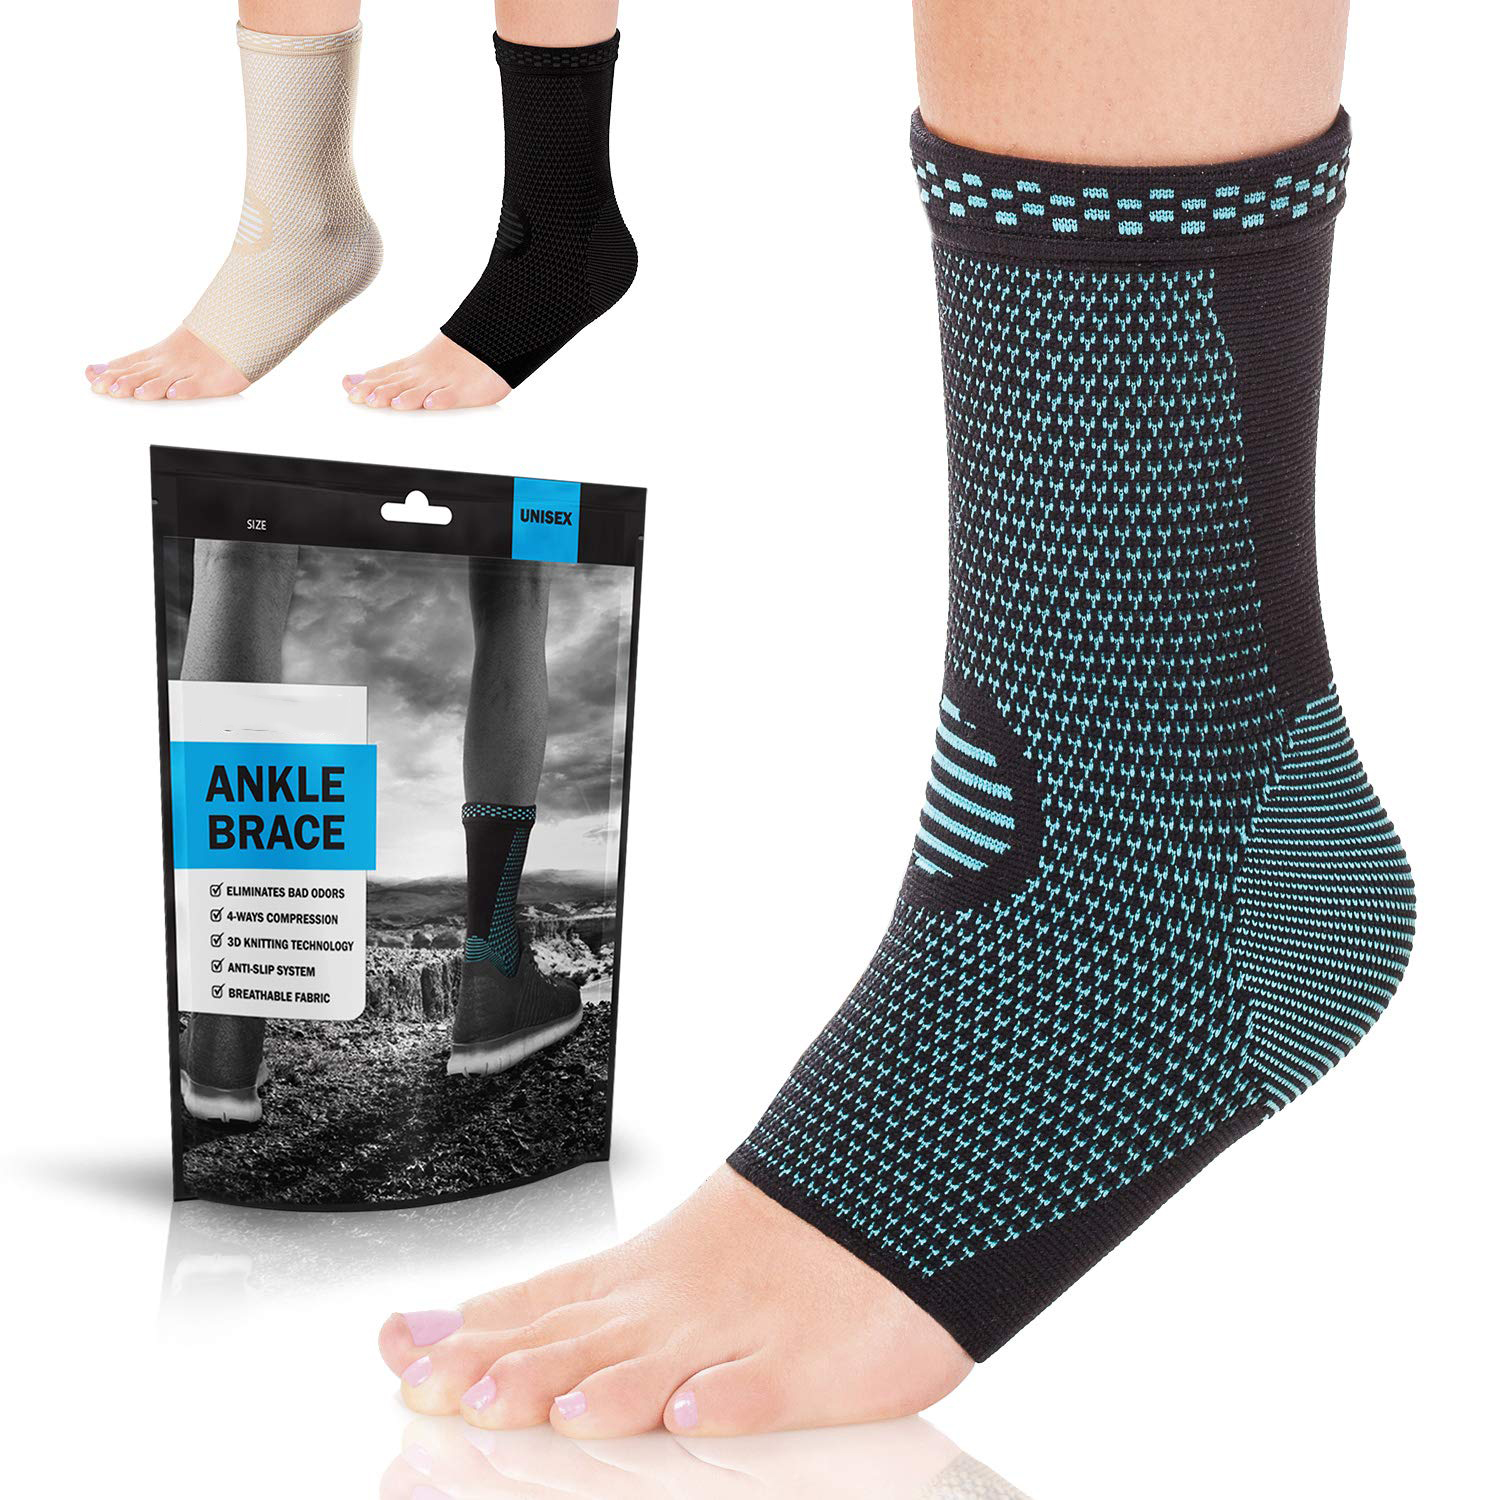 Reasonable price Elbow Belt - Ankle Brace Compression Support Sleeve (Pair) for Injury Recovery, Joint Pain and More. Achilles Tendon Support, Plantar Fasciitis Foot Socks with Arch Support, Eases...